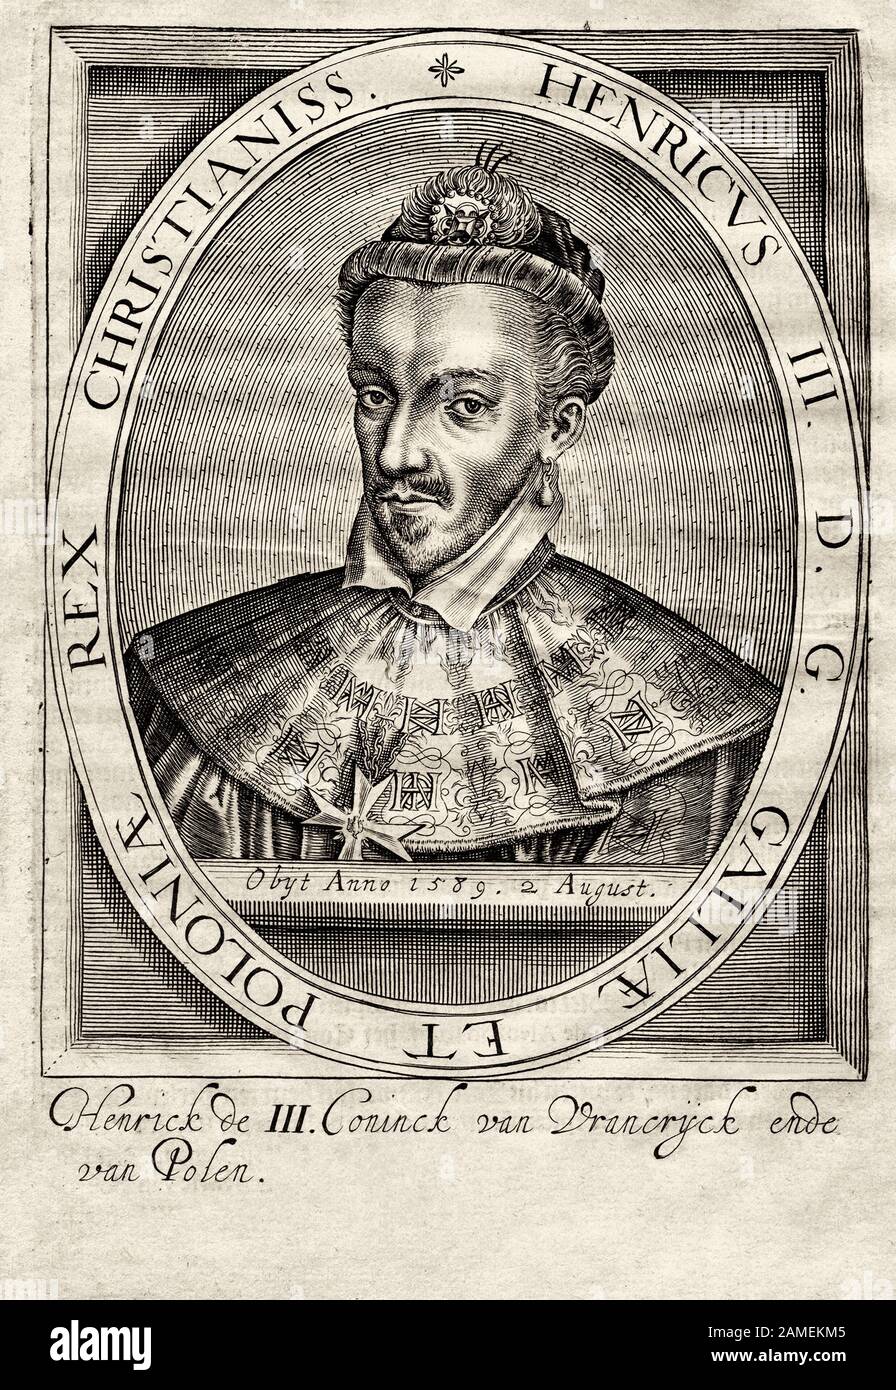 Henry of Valois (1551-1589) - king of the Polish-Lithuanian Commonwealth (1574, formally to 1575), from 1574 king of France. He was elected king of Po Stock Photo